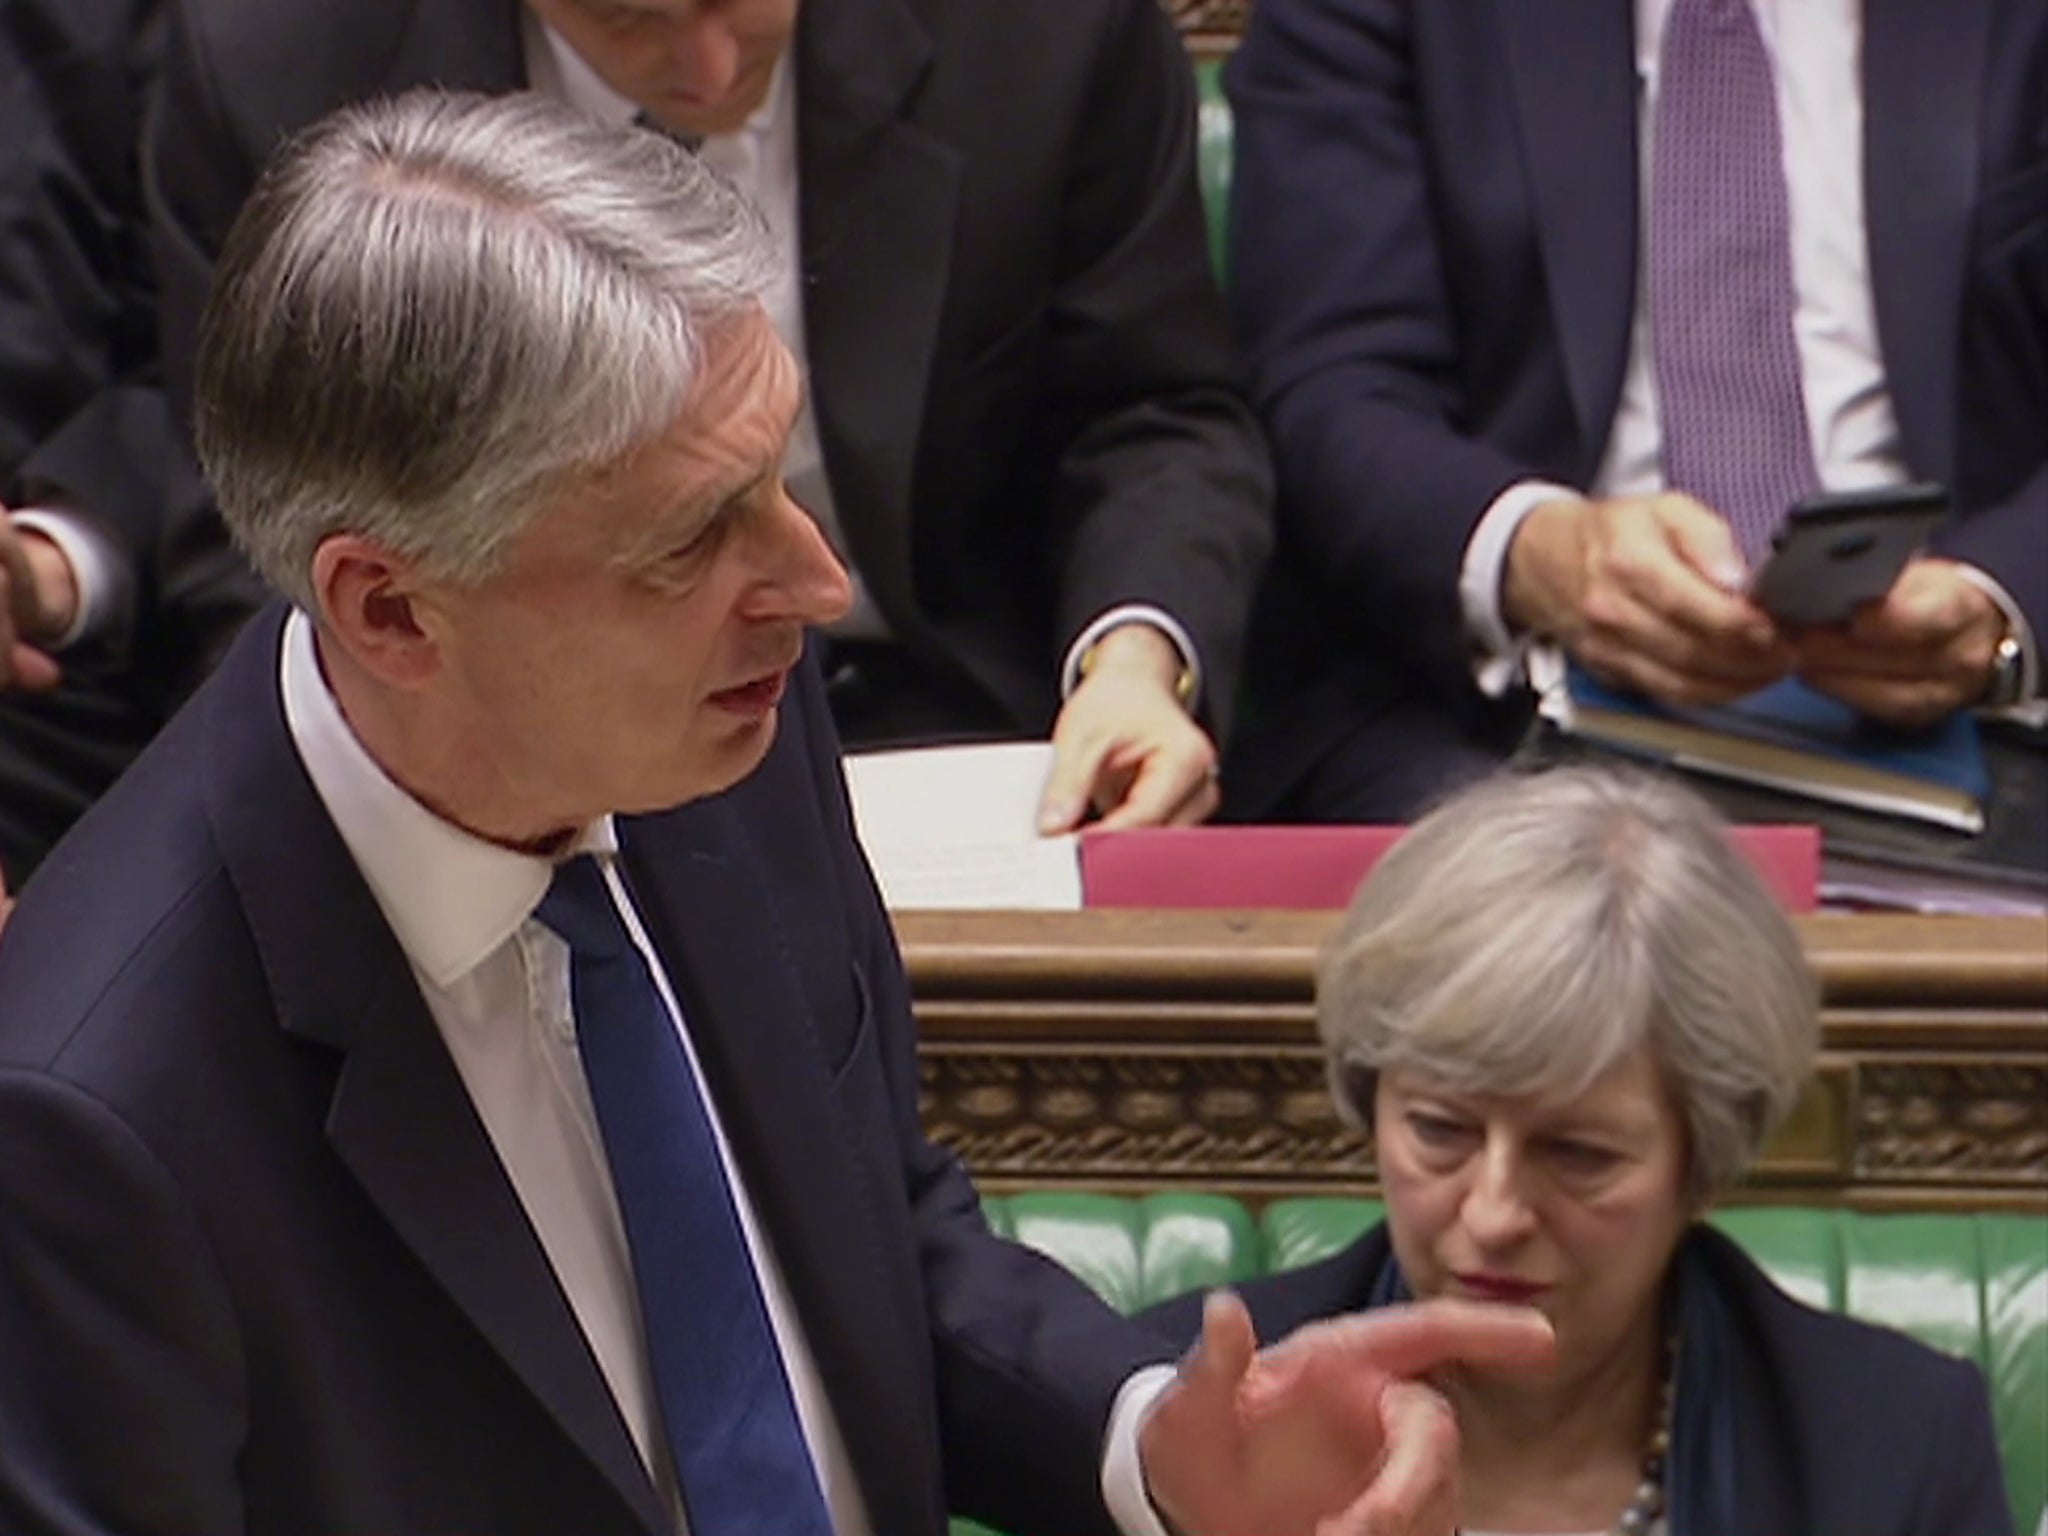 Philip Hammond delivering his Budget speech at the House of Commons